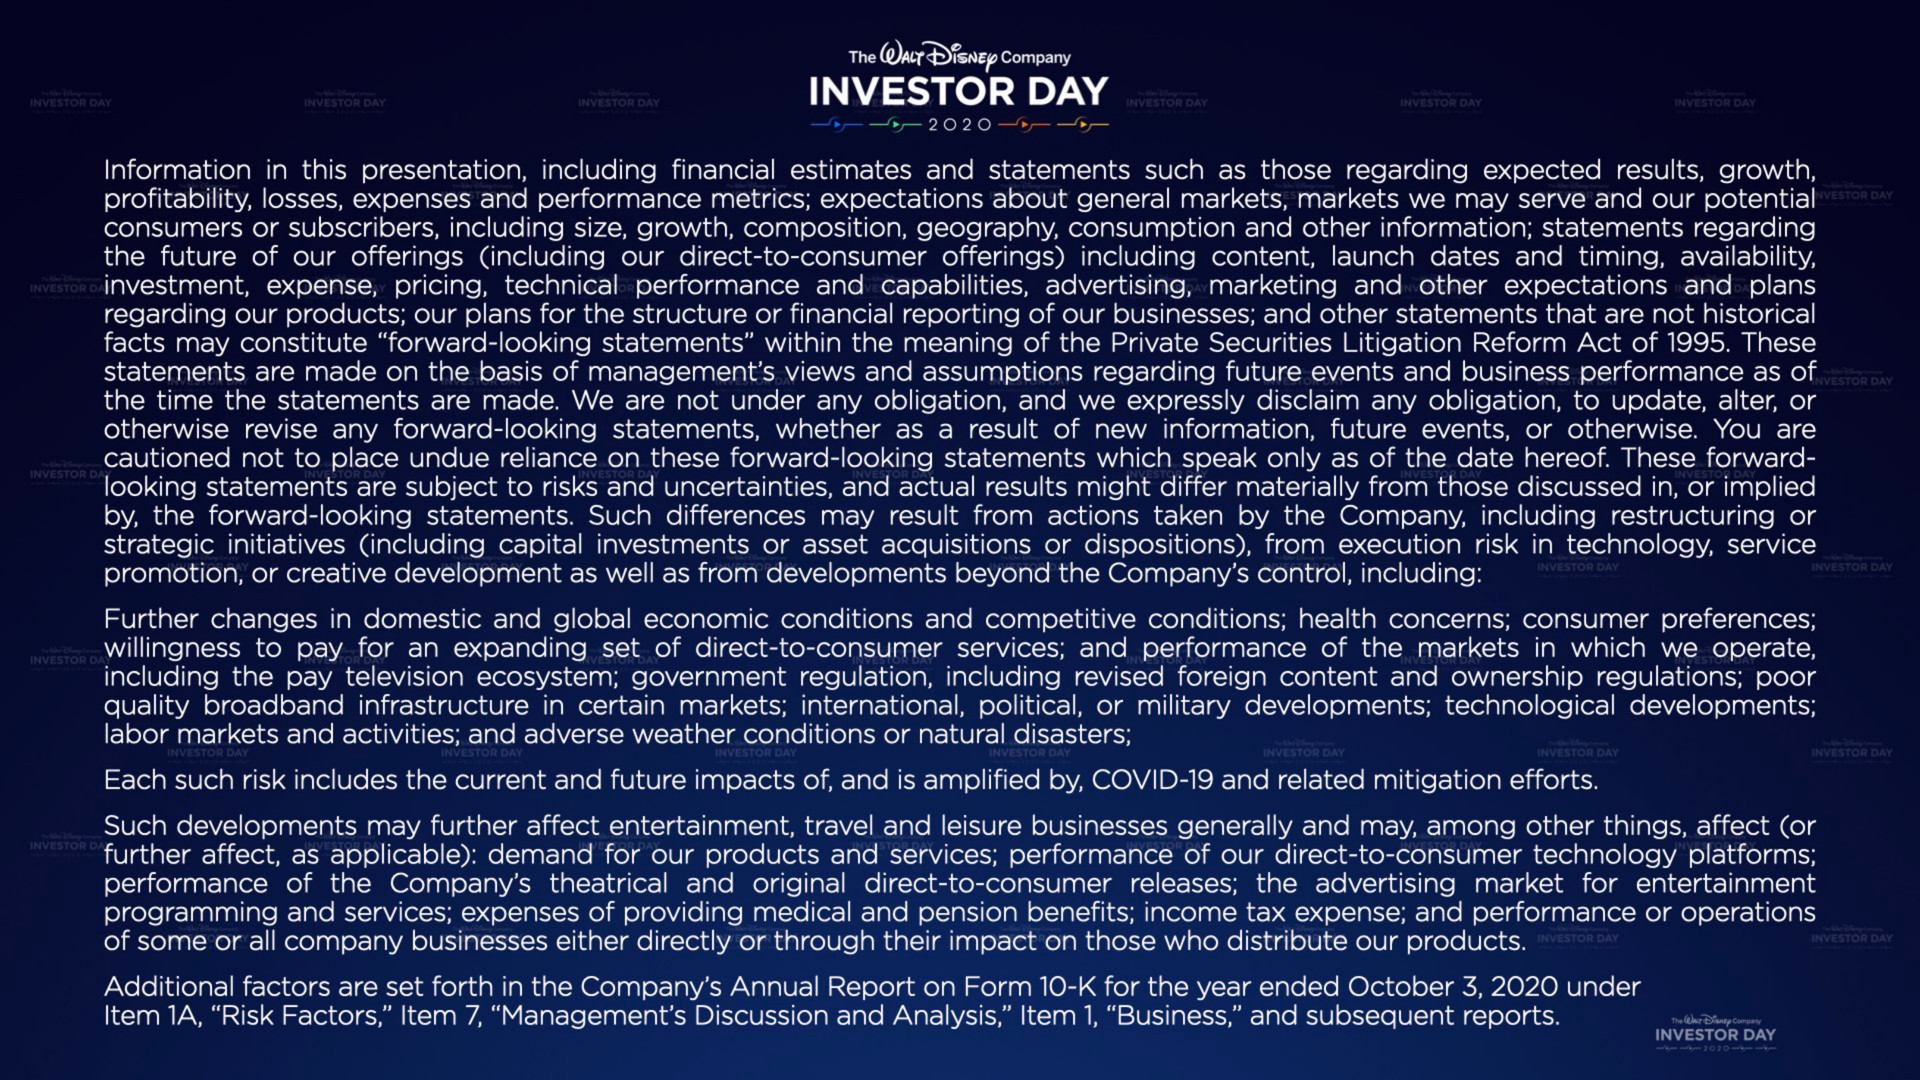 investor day information in this presentation including financial estimates and statements such as those regarding expected results growth profitability losses expenses and performance metrics expectations about general markets markets we may serve and our potential consumers or subscribers including size growth composition geography consumption and other information statements regarding the future of our offerings including our direct to consumer offerings including content launch dates and timing availability investment expense pricing technical performance and capabilities advertising marketing and other expectations and plans regarding our products our plans for the structure or financial reporting of our businesses and other statements that are not historical facts may constitute forward looking statements within the meaning of the private securities litigation reform act of these statements are made on the basis of management views and assumptions regarding future events and business performance as of the time the statements are made we are not under any obligation and we expressly disclaim any obligation to update alter or otherwise revise any forward looking statements whether as a result of new information future events or otherwise you are cautioned not to place undue reliance on these forward looking statements which speak only as of the date hereof these forward looking statements are subject to risks and uncertainties and actual results might differ materially from those discussed in or implied by the forward looking statements such differences may result from actions taken by the company including or strategic initiatives including capital investments or asset acquisitions or dispositions from execution risk in technology service promotion or creative development as well as from beyond the company control including further changes in domestic and global economic conditions and competitive conditions health concerns consumer preferences willingness to pay for an expanding set of direct to consumer services and performance of the markets in which we operate including the pay television ecosystem government regulation including revised foreign content and ownership regulations poor quality infrastructure in certain markets international political or military developments technological developments labor markets and activities and adverse weather conditions or natural disasters each such risk includes the current and future impacts of and is amplified by covid and related mitigation efforts such developments may further affect entertainment travel and leisure businesses generally and may among other things affect or further affect as applicable demand for our products and services performance of our direct to consumer technology platforms performance of the company theatrical and original direct to consumer releases the advertising market for entertainment programming and services expenses of providing medical and pension benefits income tax expense and performance or operations of some or all company businesses either directly or through their impact on those who distribute our products additional factors are set forth in the company annual report on form for the year ended under item a risk factors item management discussion and analysis item business and subsequent reports | Disney